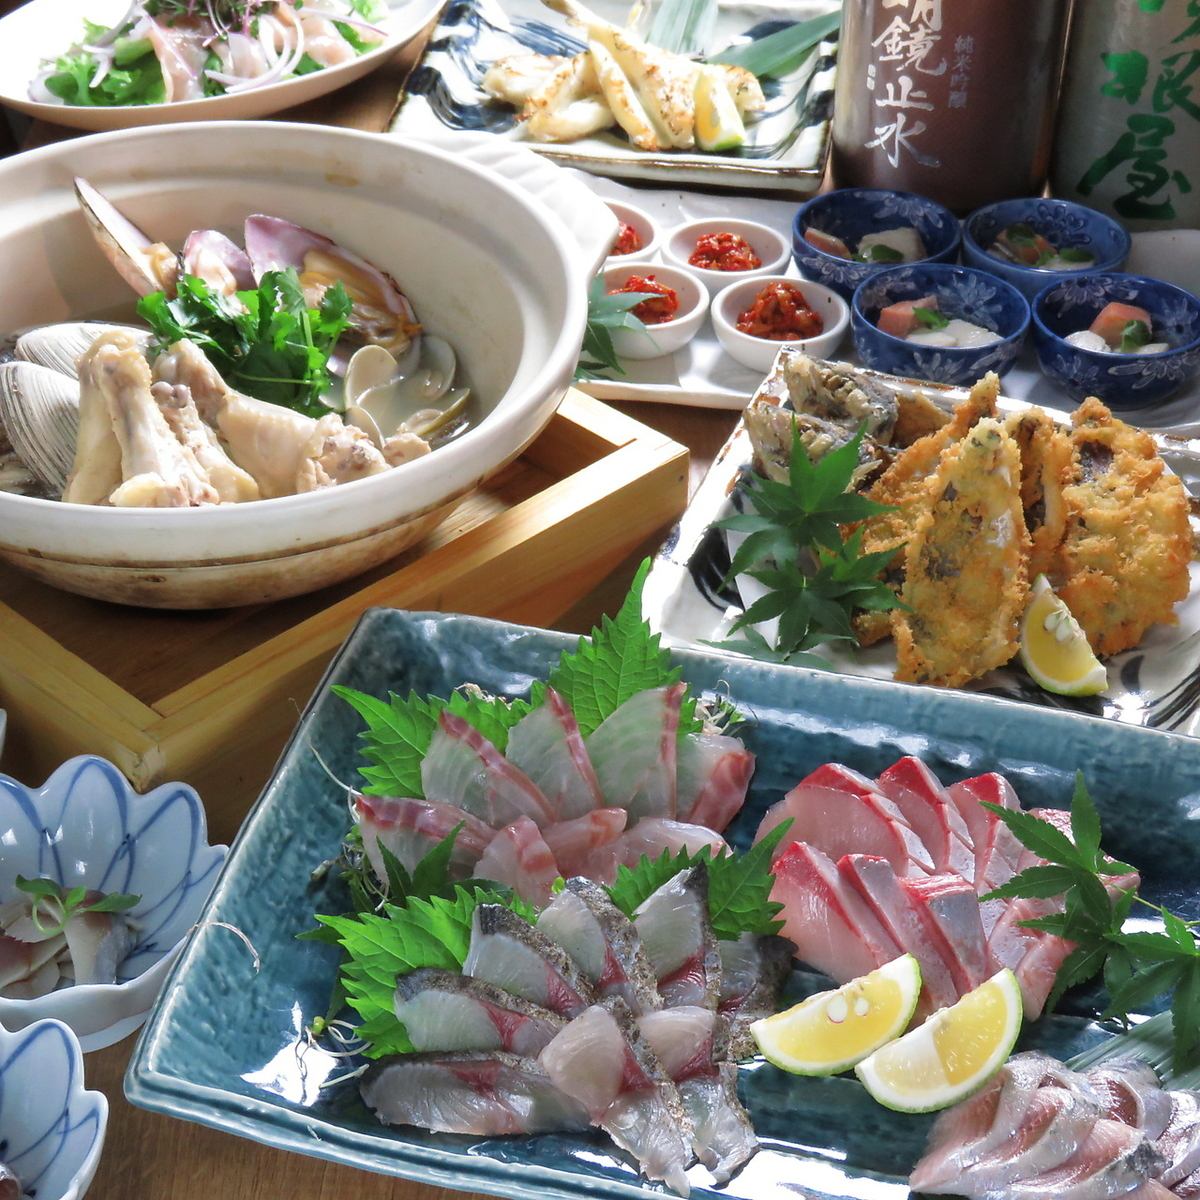 Enjoy live abalone, kueh, etc. Fresh seafood delivered directly from the farm and sake!